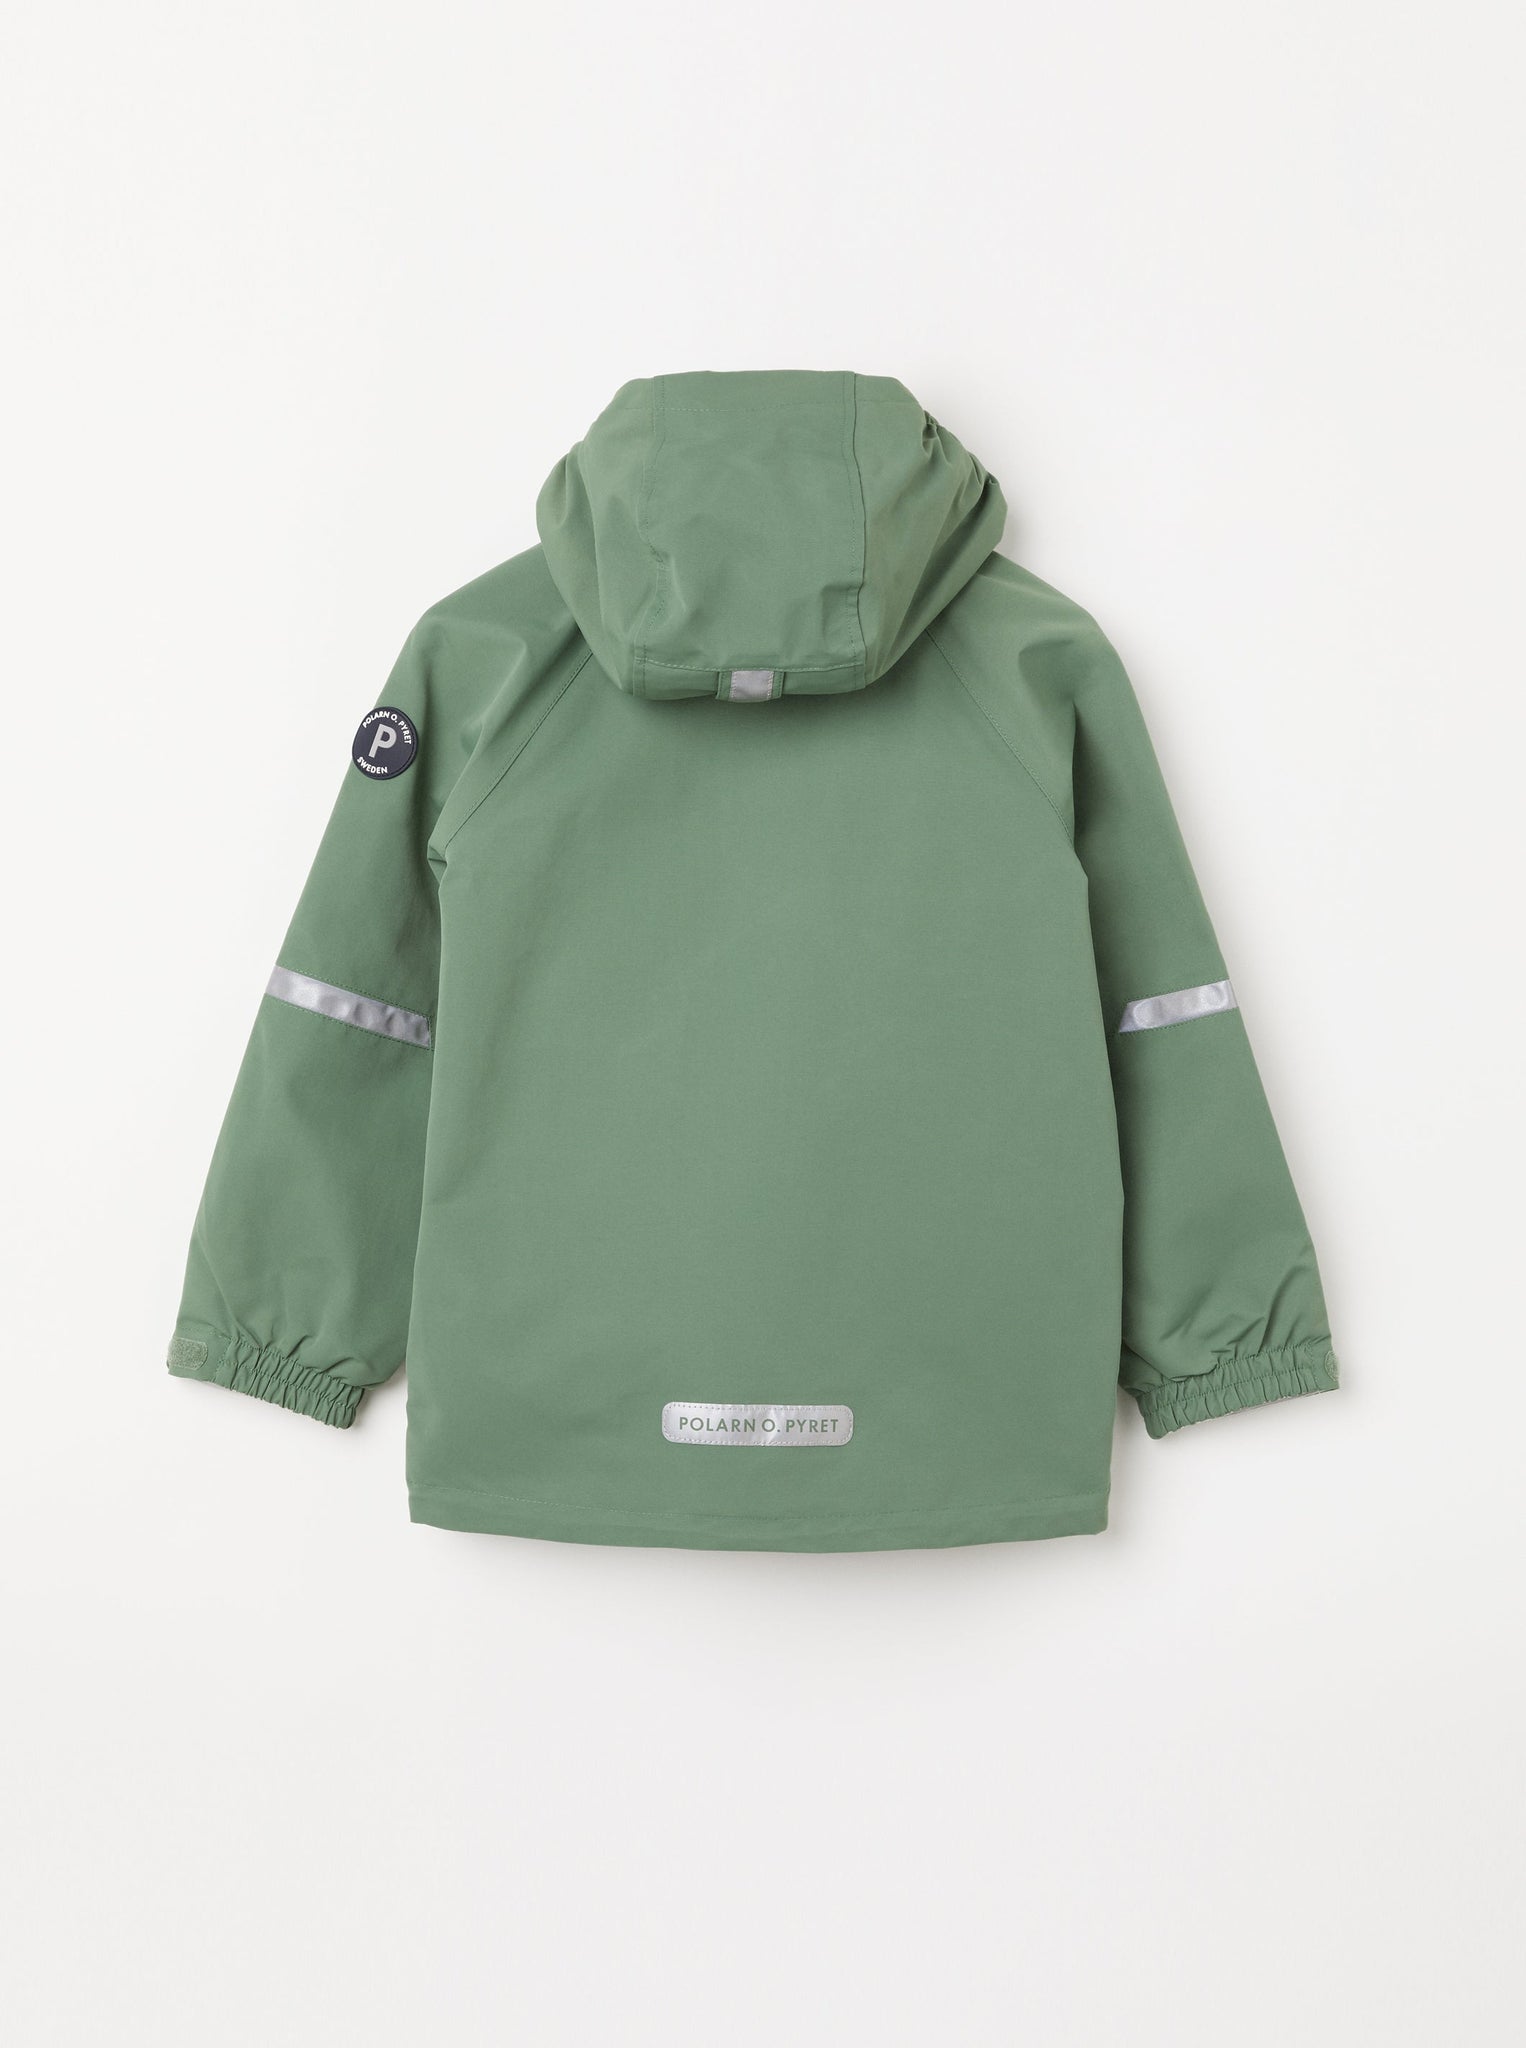 Green Kids Waterproof Shell Jacket from the Polarn O. Pyret kidswear collection. Ethically produced outerwear.